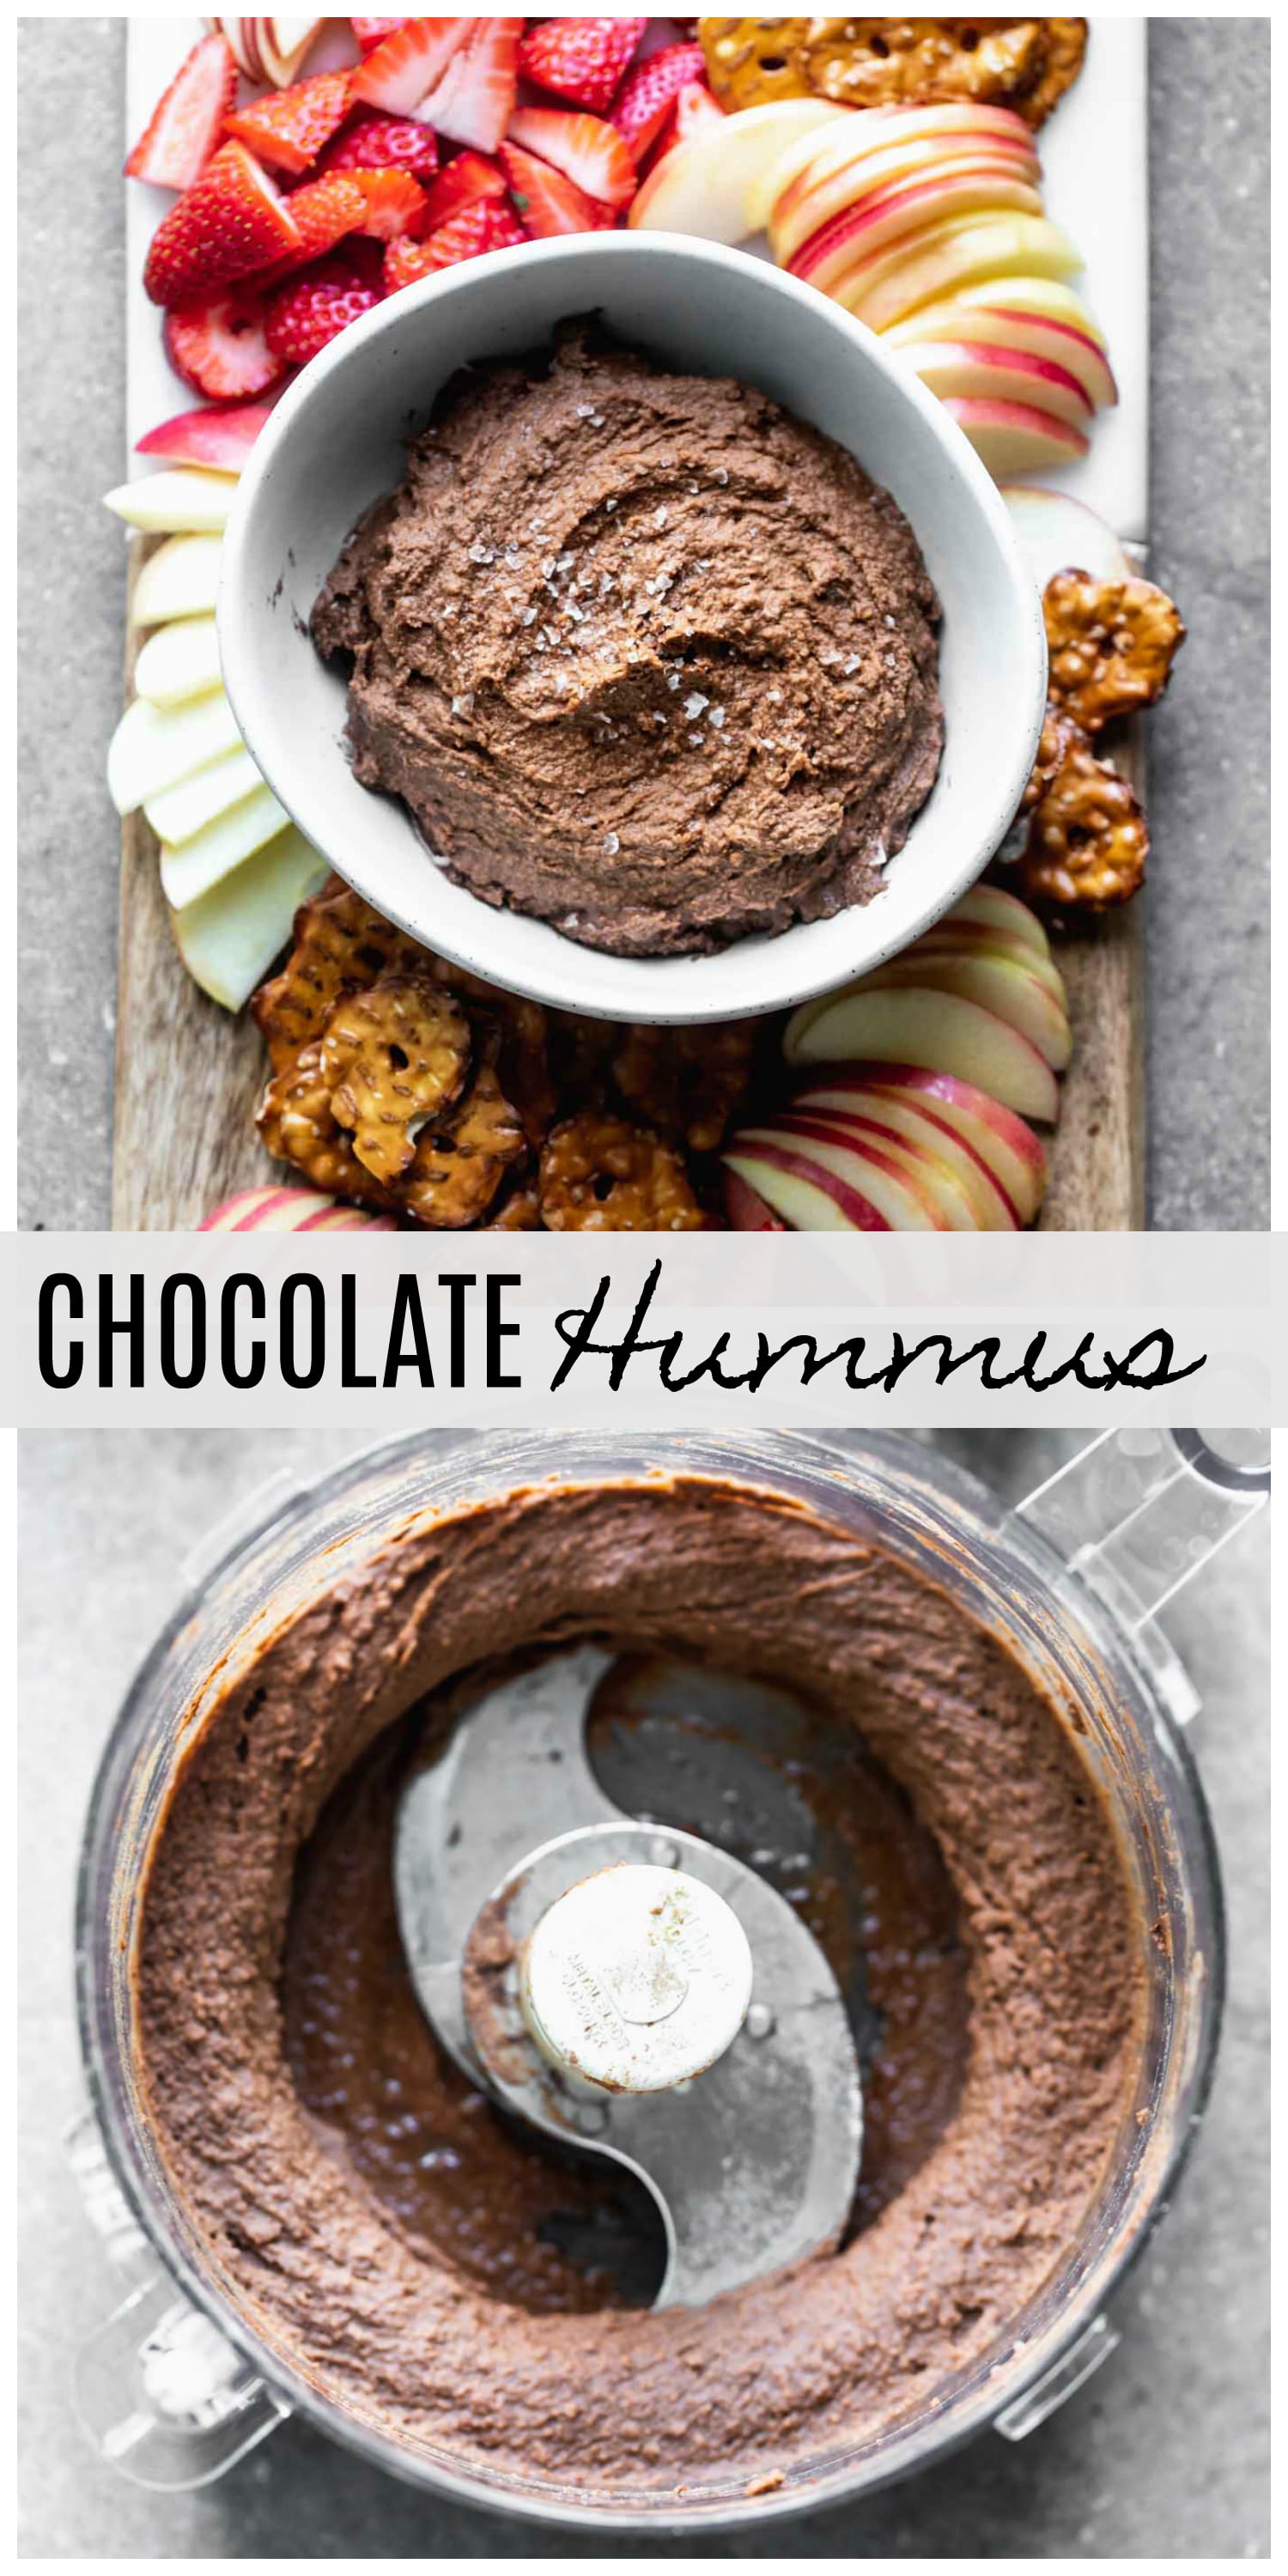 Chocolate Hummus: An easy, healthy way to get your chocolate fix without all the guilt!